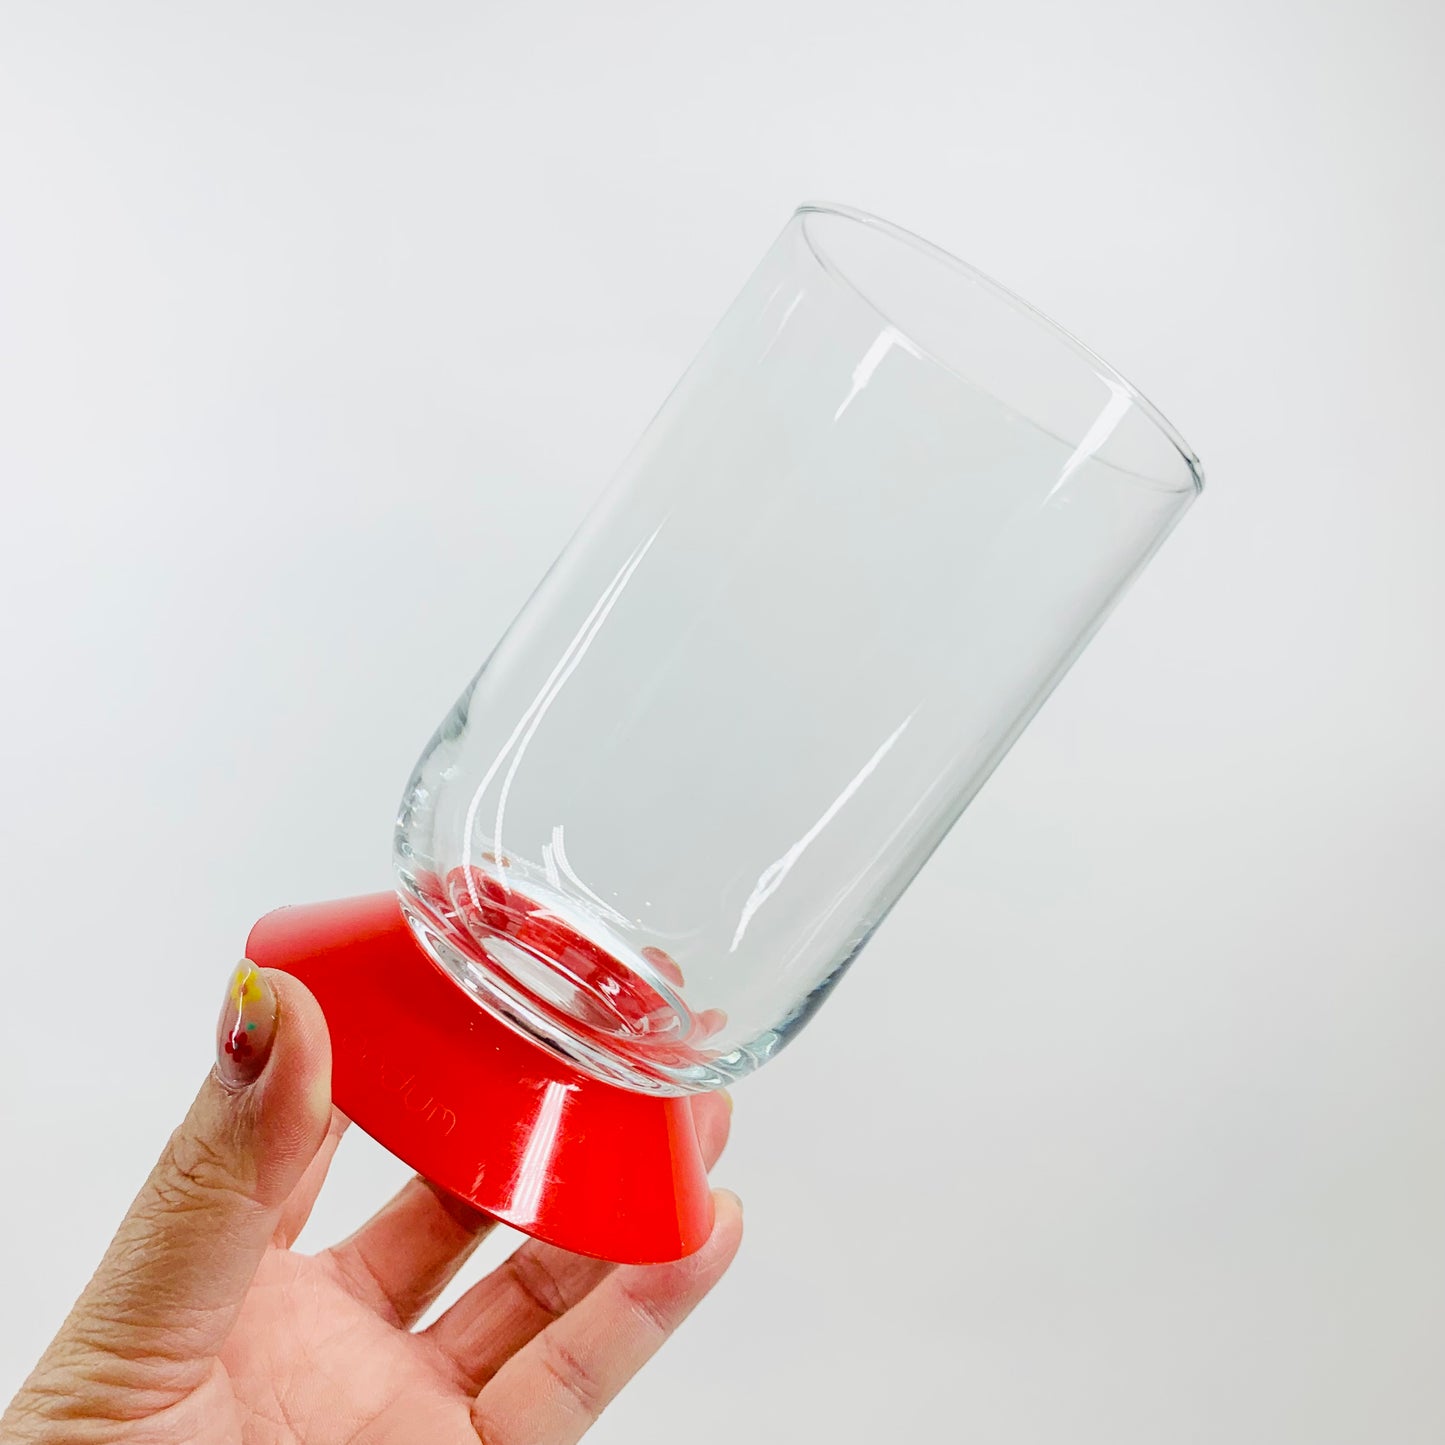 Retro Bodum tall water glasses/highball with red sleeves